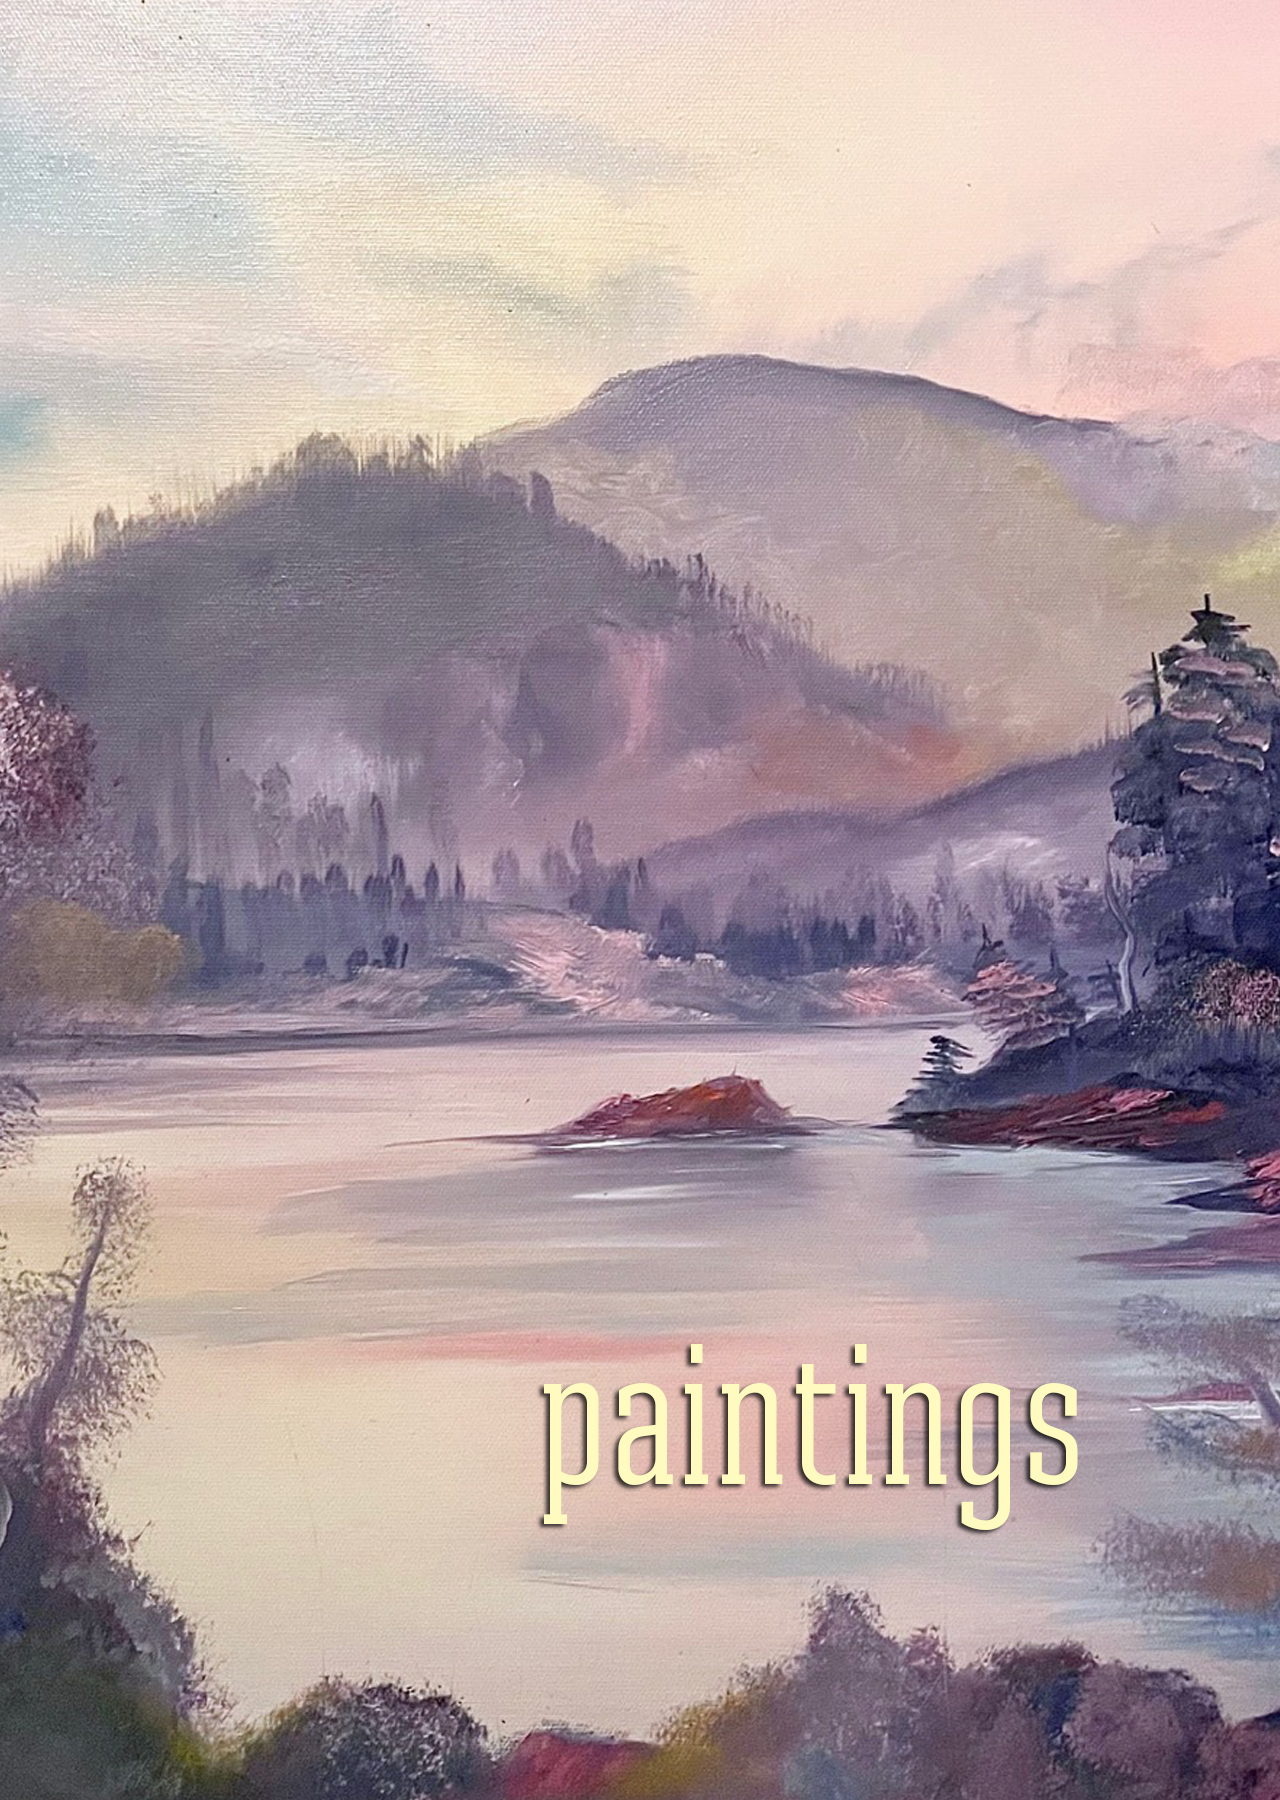 Landscape painting full of pastel pinks, blues, and yellow in the background and water with darker, moodier maroons and purples in the foreground